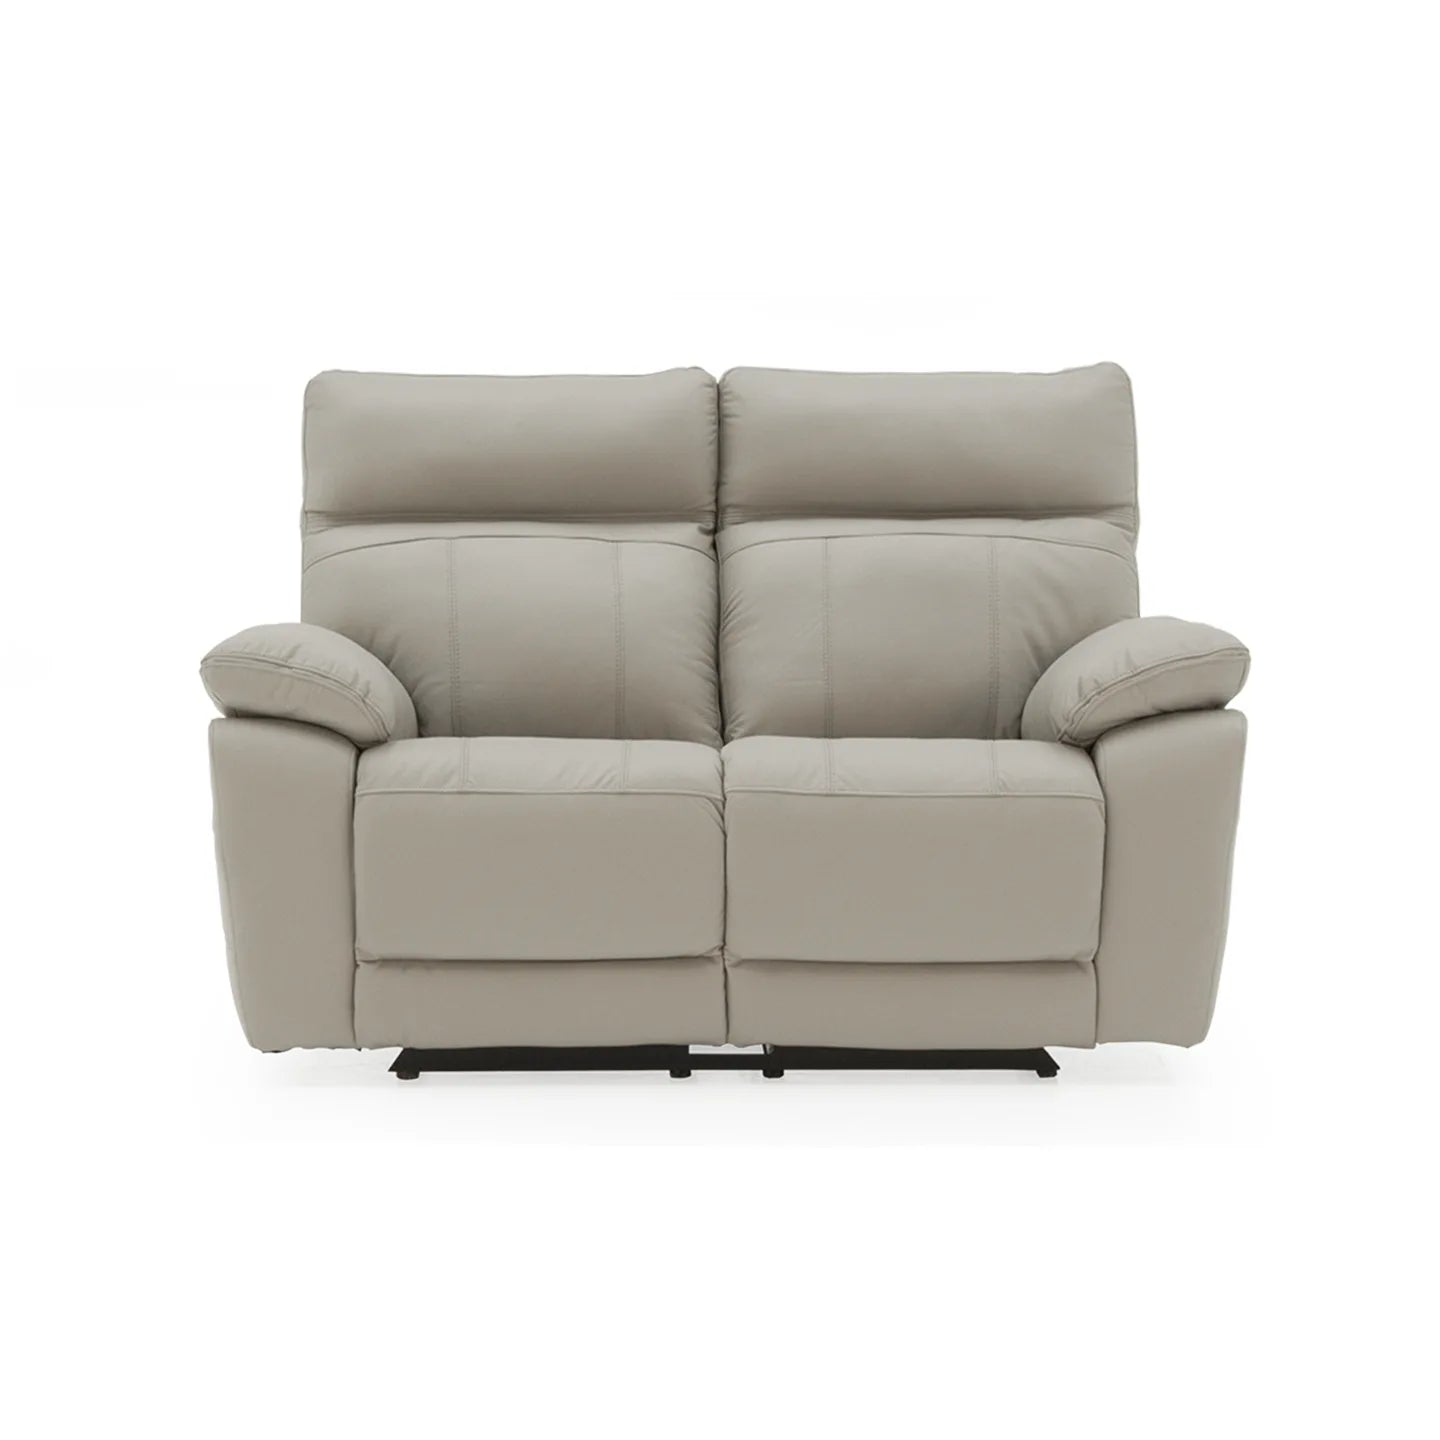 Positano Light Grey Leather 2 Seater Electric Recliner Sofa